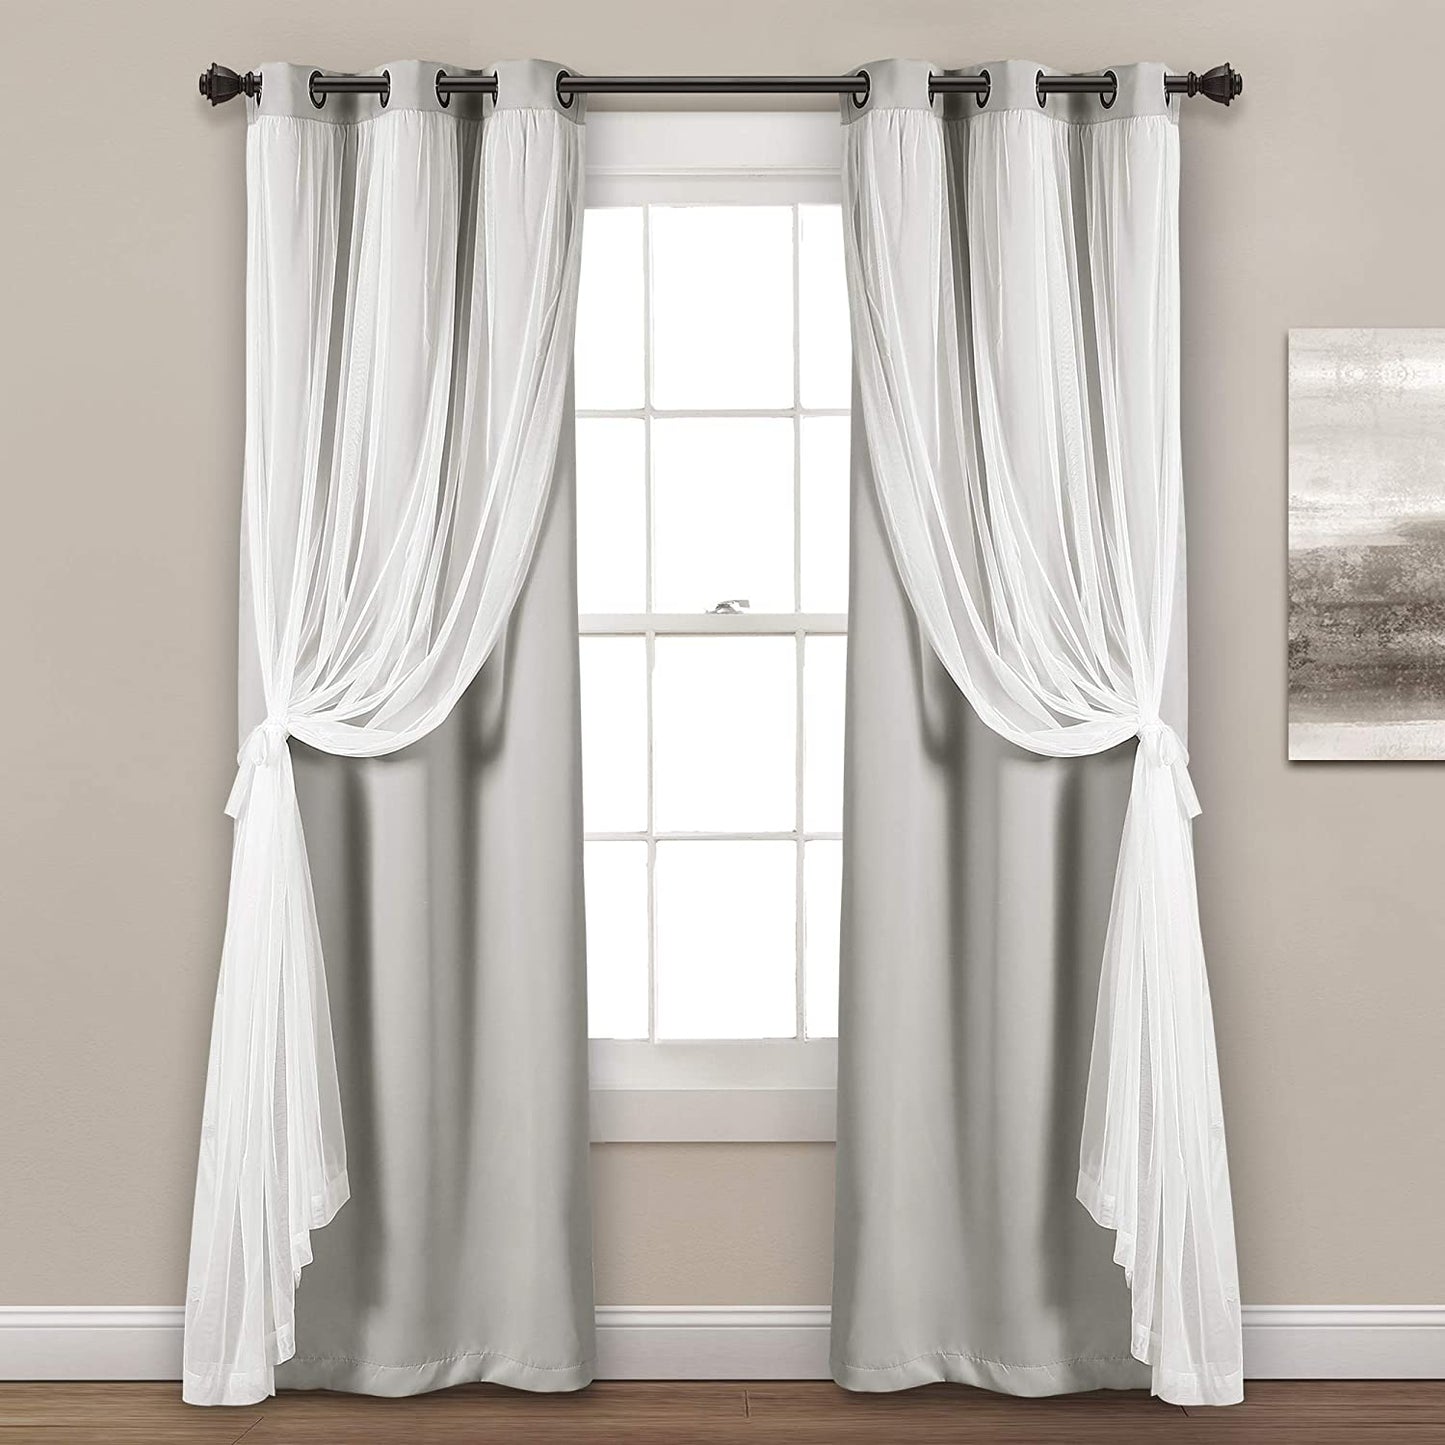 Sheer Grommet Curtains Panel with Insulated Blackout Lining, Room Darkening Window Curtain Set (Pair), 38"W X 108"L, Light Gray